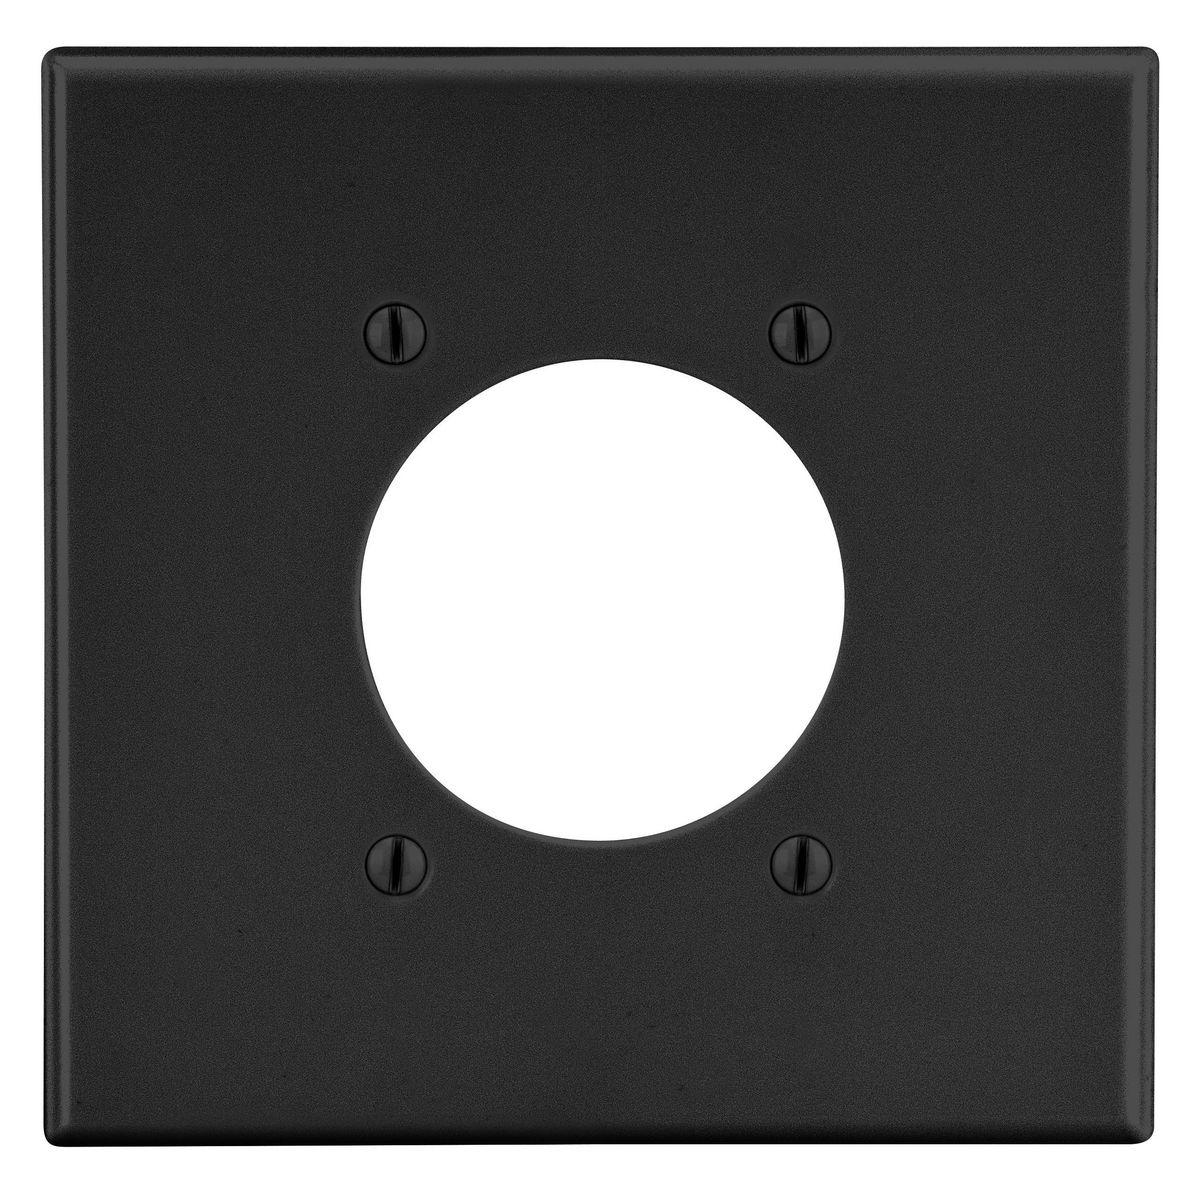 Hubbell PJ703BK Wallplate,  Mid-Size 2-Gang, 2.15" Opening, Black  ; High-impact, self-extinguishing polycarbonate material ; More Rigid ; Sharp lines and less dimpling ; Smooth satin finish ; Blends into wall with an optimum finish ; Smooth Satin Finish